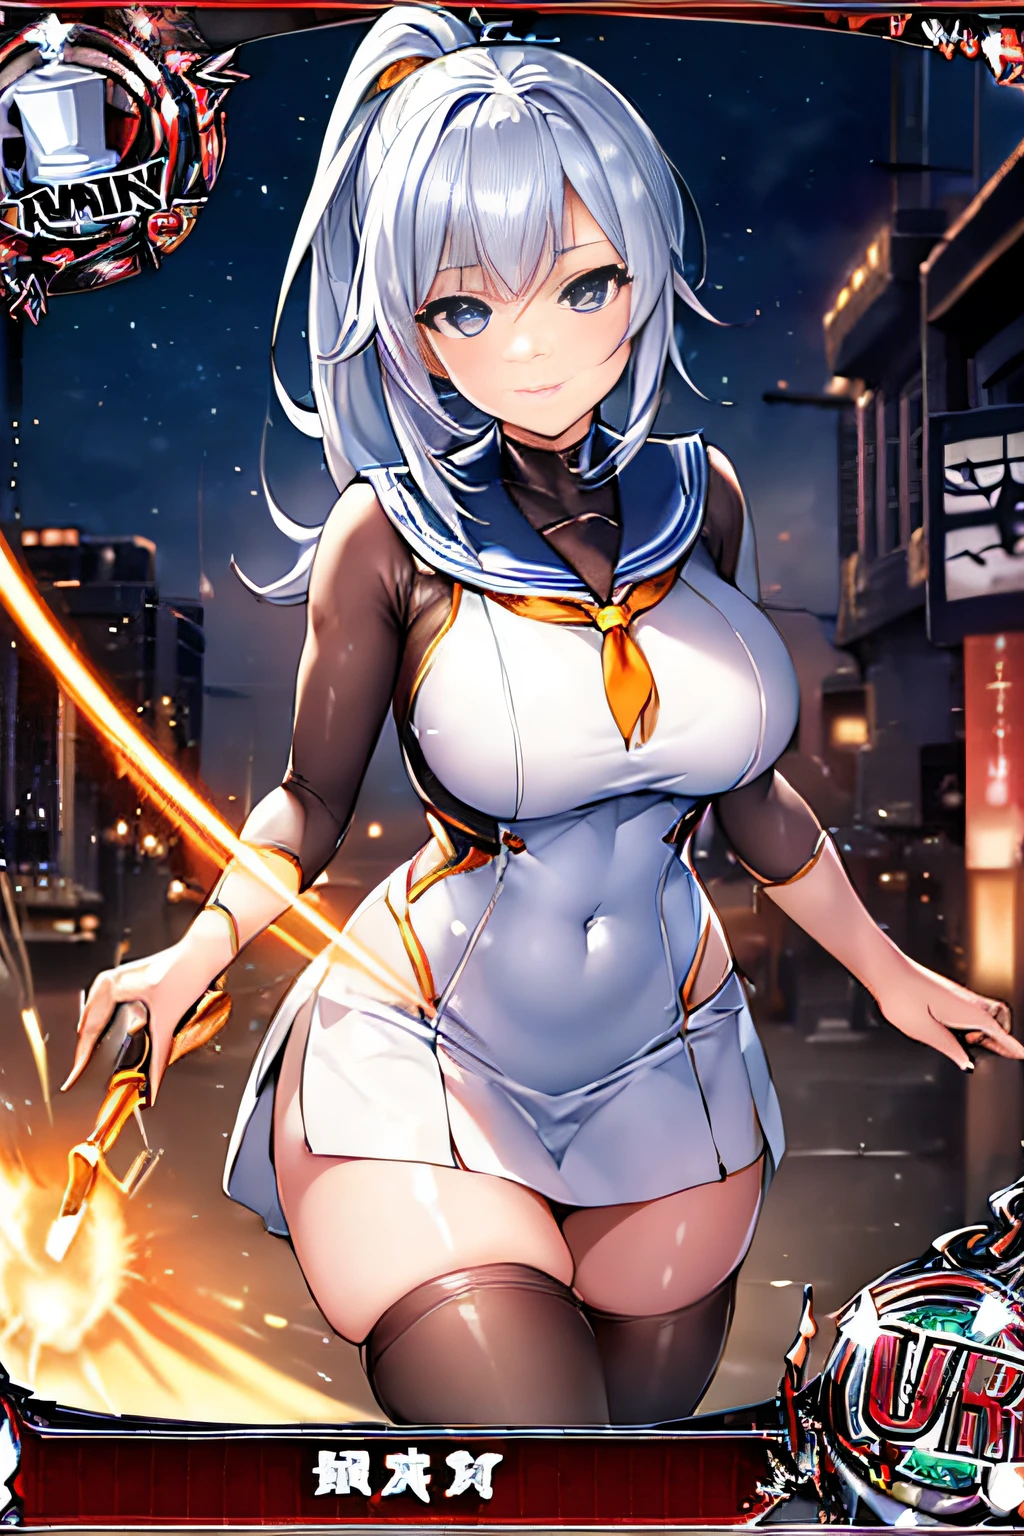 (Trading Card Game Frames:1.7),Cybernetic arm and glowing cyber girl,(J Women's Uniform,a sailor suit,White skirt,),Intense body movements,Add a motion blur effect to simulate motion,Stand on the streets of a desolate battlefield.Surrounded by a network of wires. Surrounded by a net of orange LED circuits. (Cyber Girl with Orange Glowing Sword:1.3), Shiny Silver Shorthair,disheveled ponytail,,Cute smile,Perfect round face,Black eyes,A cheerful smile that makes the viewer happy,Proper body proportion,Intricate details,Very delicate and beautiful hair,photos realistic,Dreamy,Professional Lighting,realistic shadow,Solo Focus,Beautiful hands,Beautiful fingers,Detailed finger features,detailed clothes features,Detailed hair features,detailed facial features,top-quality,Ultra-high resolution output image,) ,(The 8k quality,),(Image Mode Ultra HD,),(Image Mode Ultra HD,),(Sea Art 2 Mode.1:1.3),Science fiction fantasy